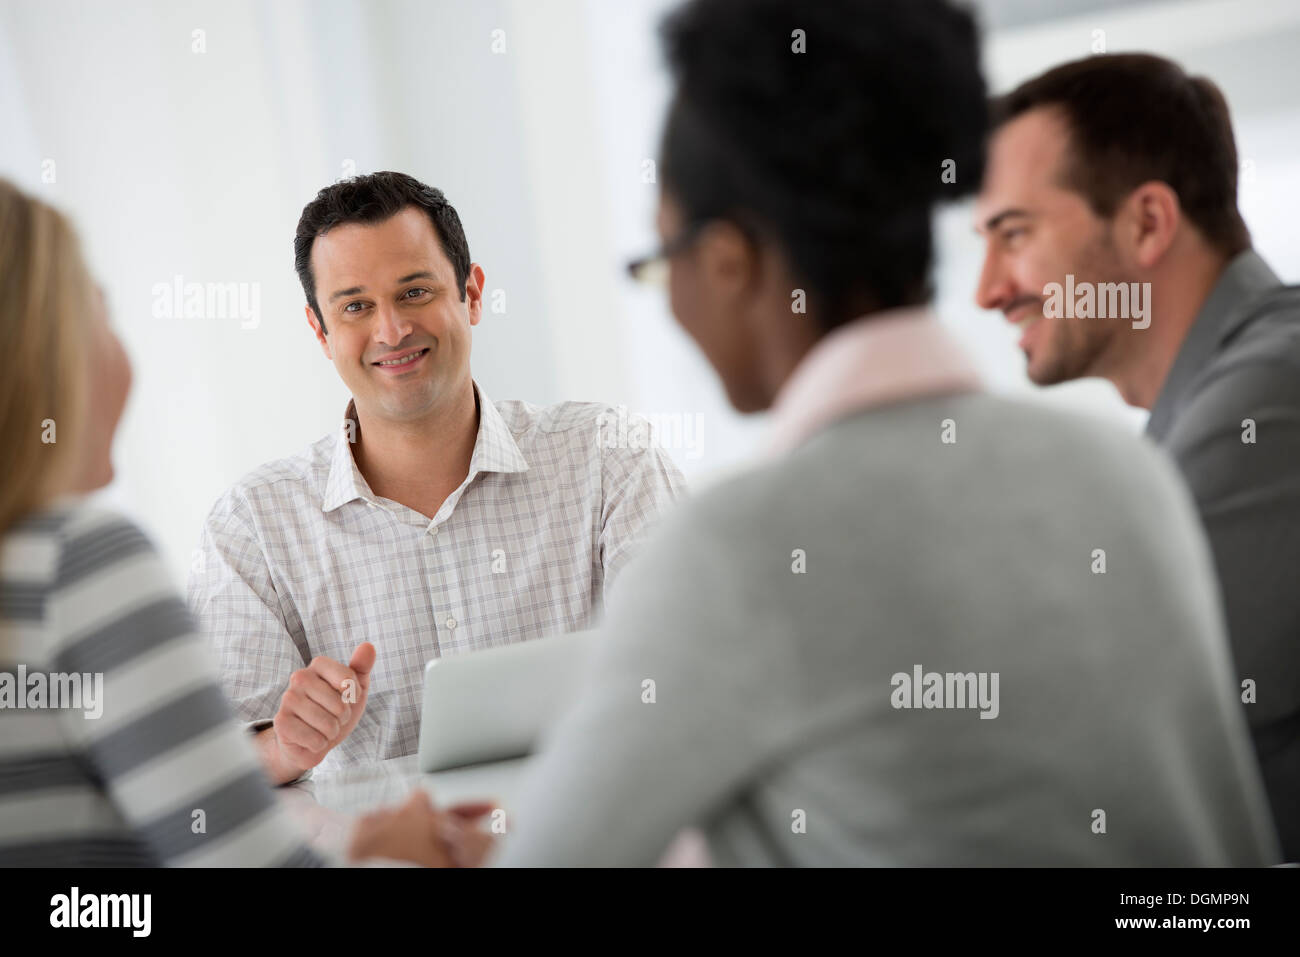 Office interior. A group of four people, two men and two women, seated around a table. Business meeting. Stock Photo